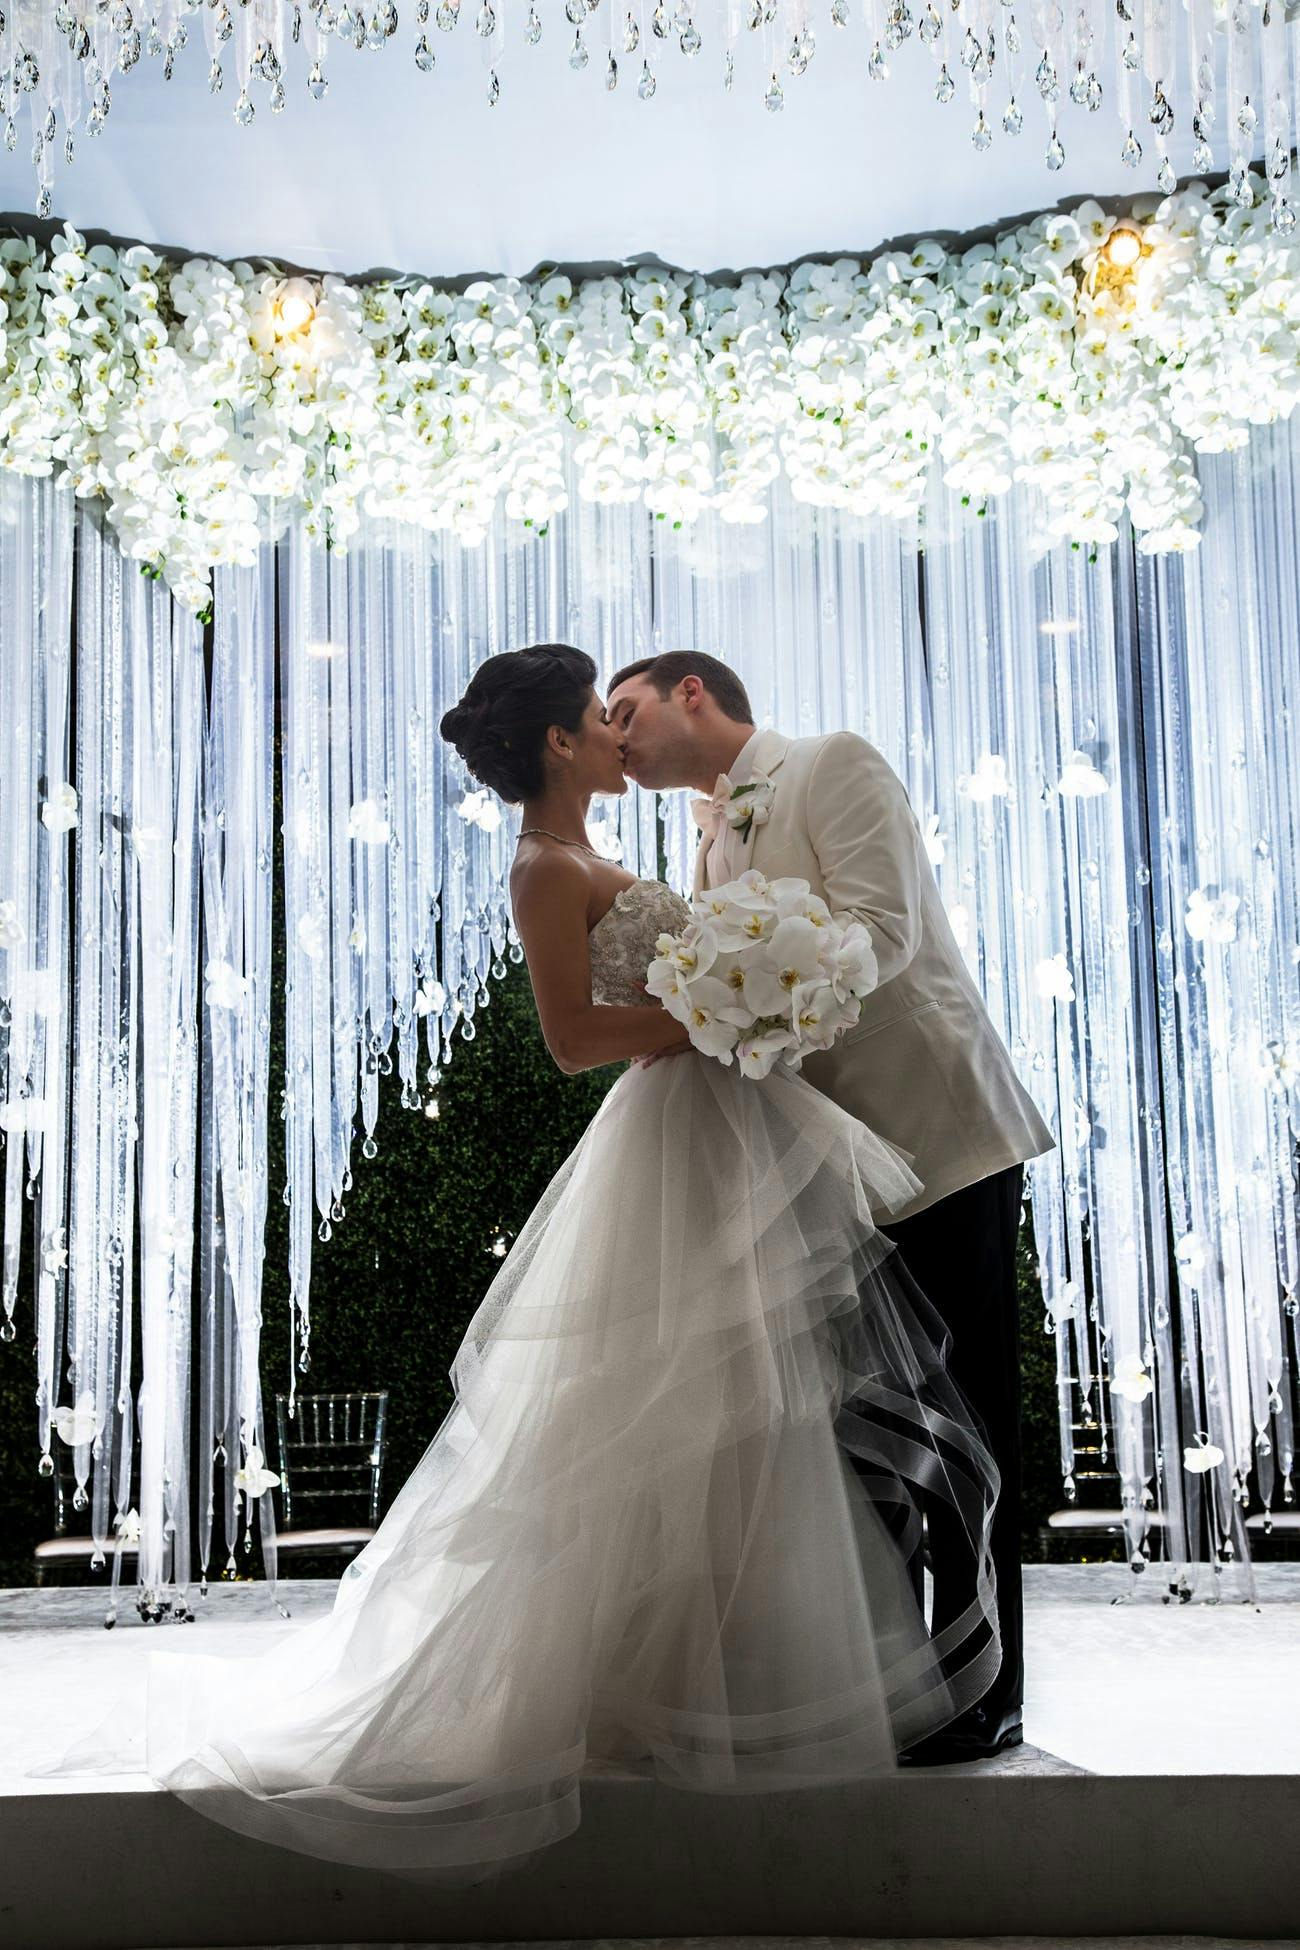 Bride and Groom Kiss in Front of Shimmering Tassel Backdrop Crowned with White Florals | PartySlate